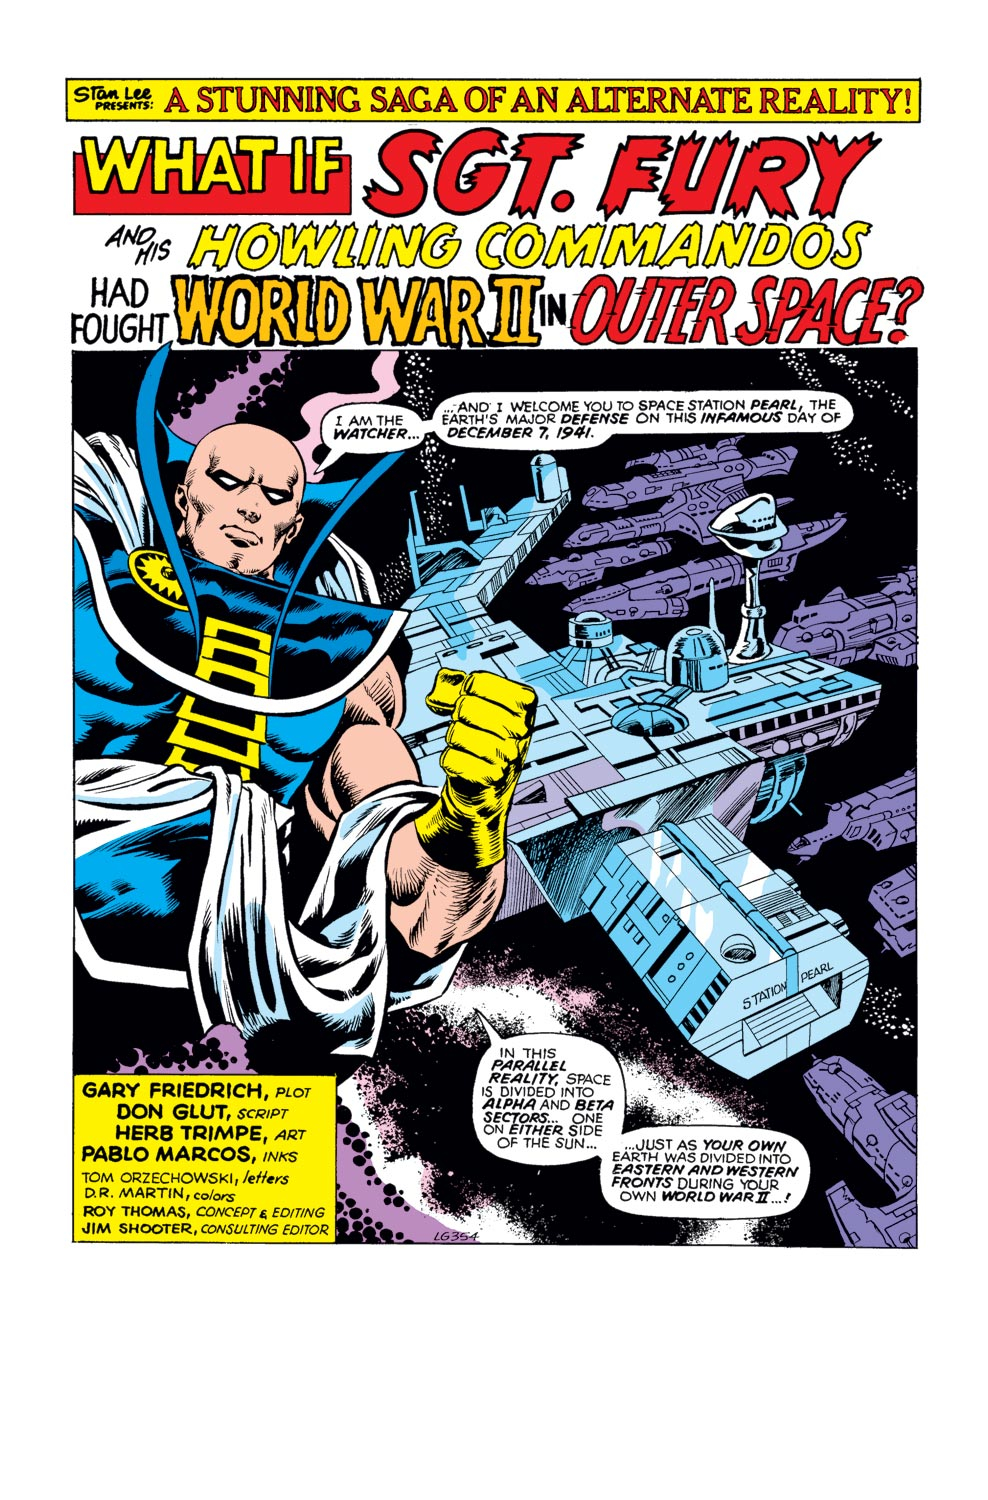 What If? (1977) Issue #14 - Sgt. Fury had Fought WWII in Outer Space #14 - English 2